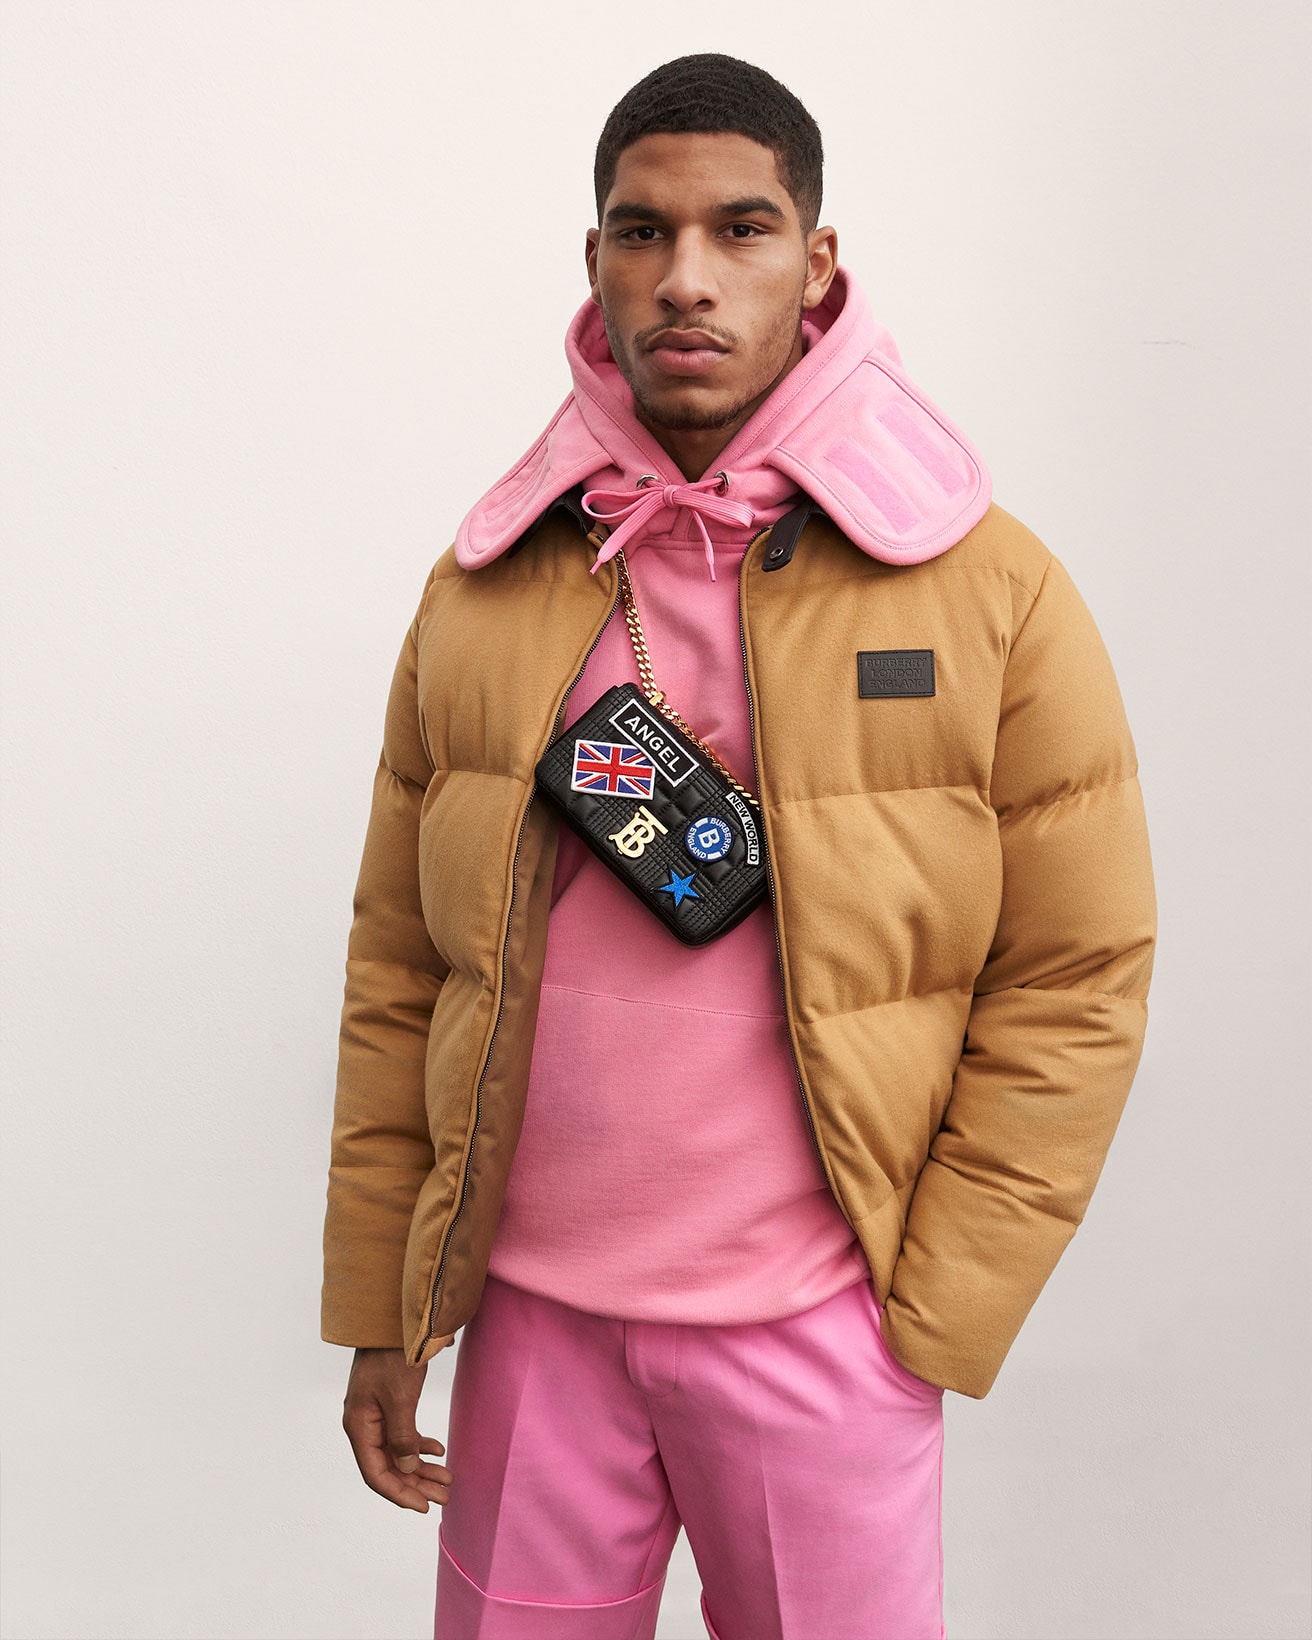 burberry fall winter fw21 pre-collection riccardo tisci brown puffer jacket pink hoodie bag